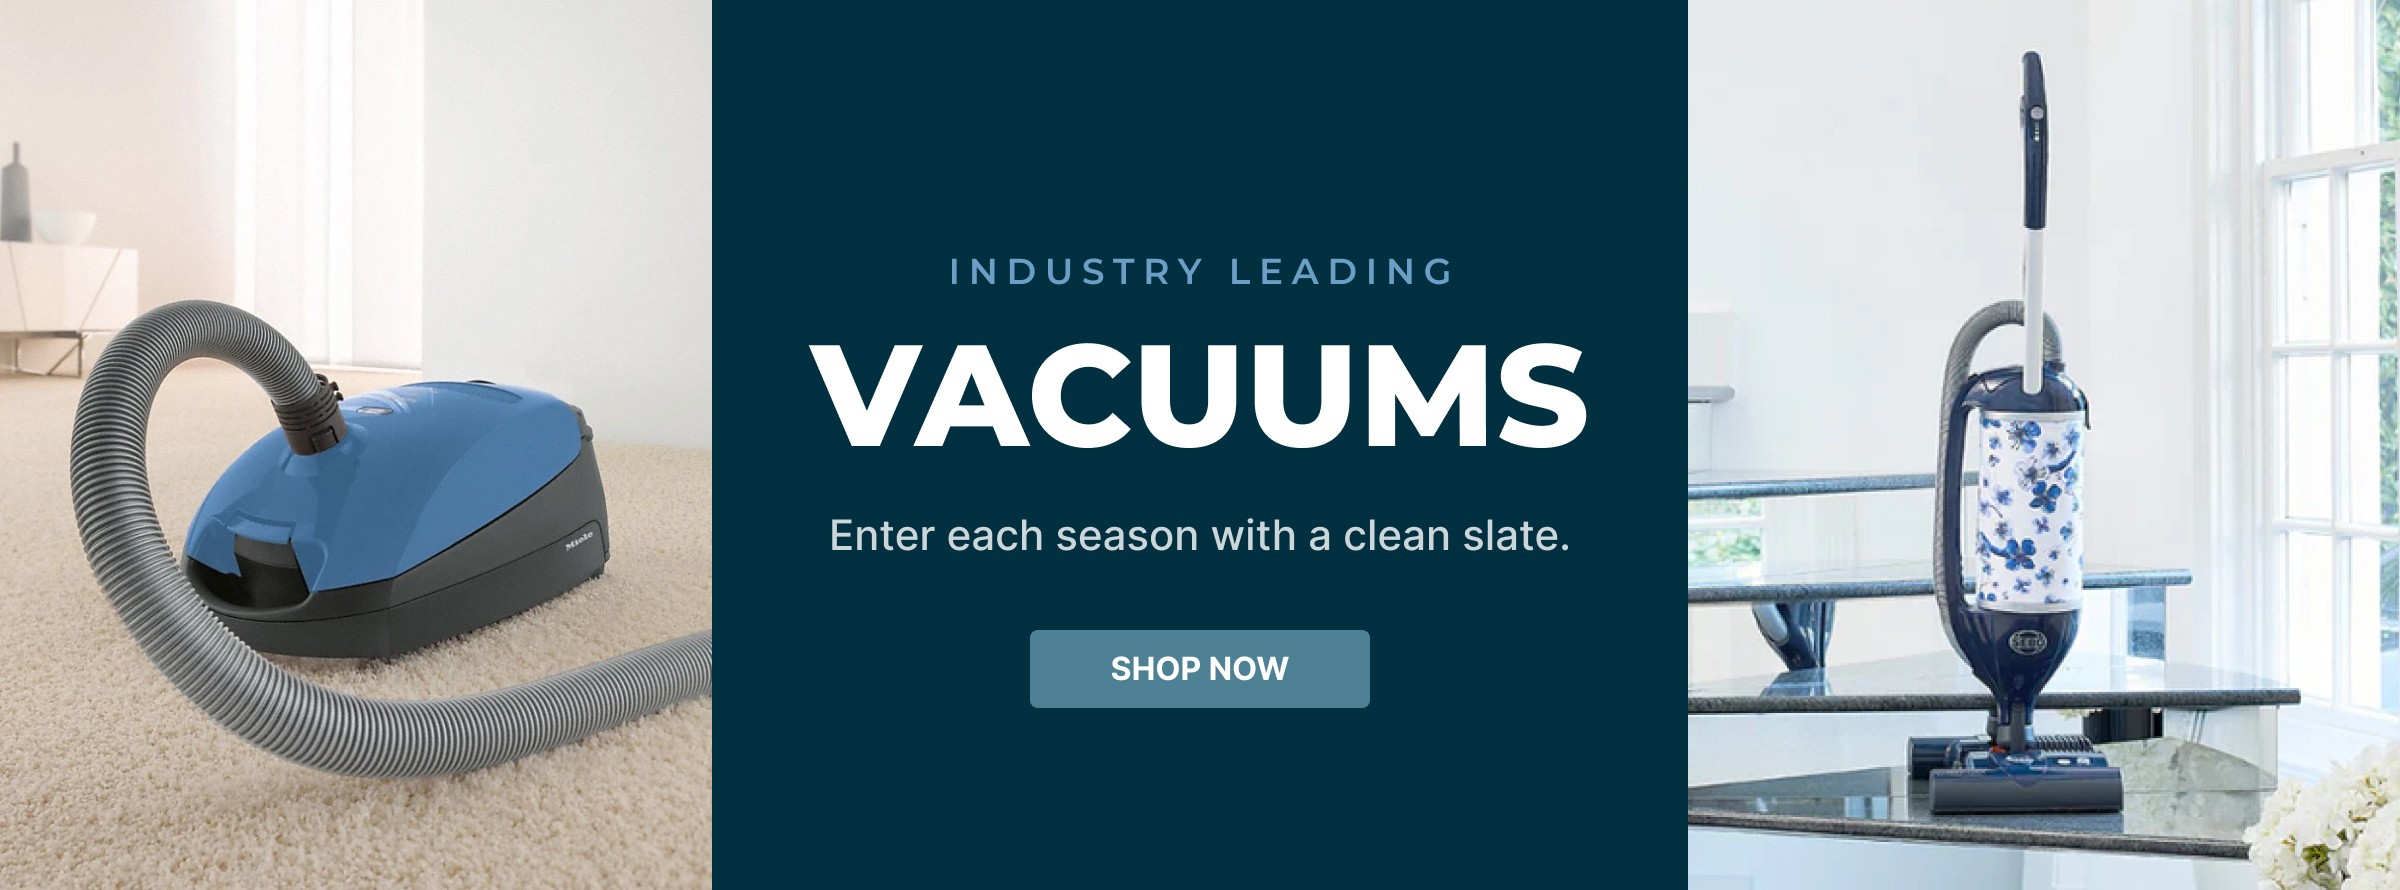 Industry Leading Vacuums - Enter each season with a clean slate.